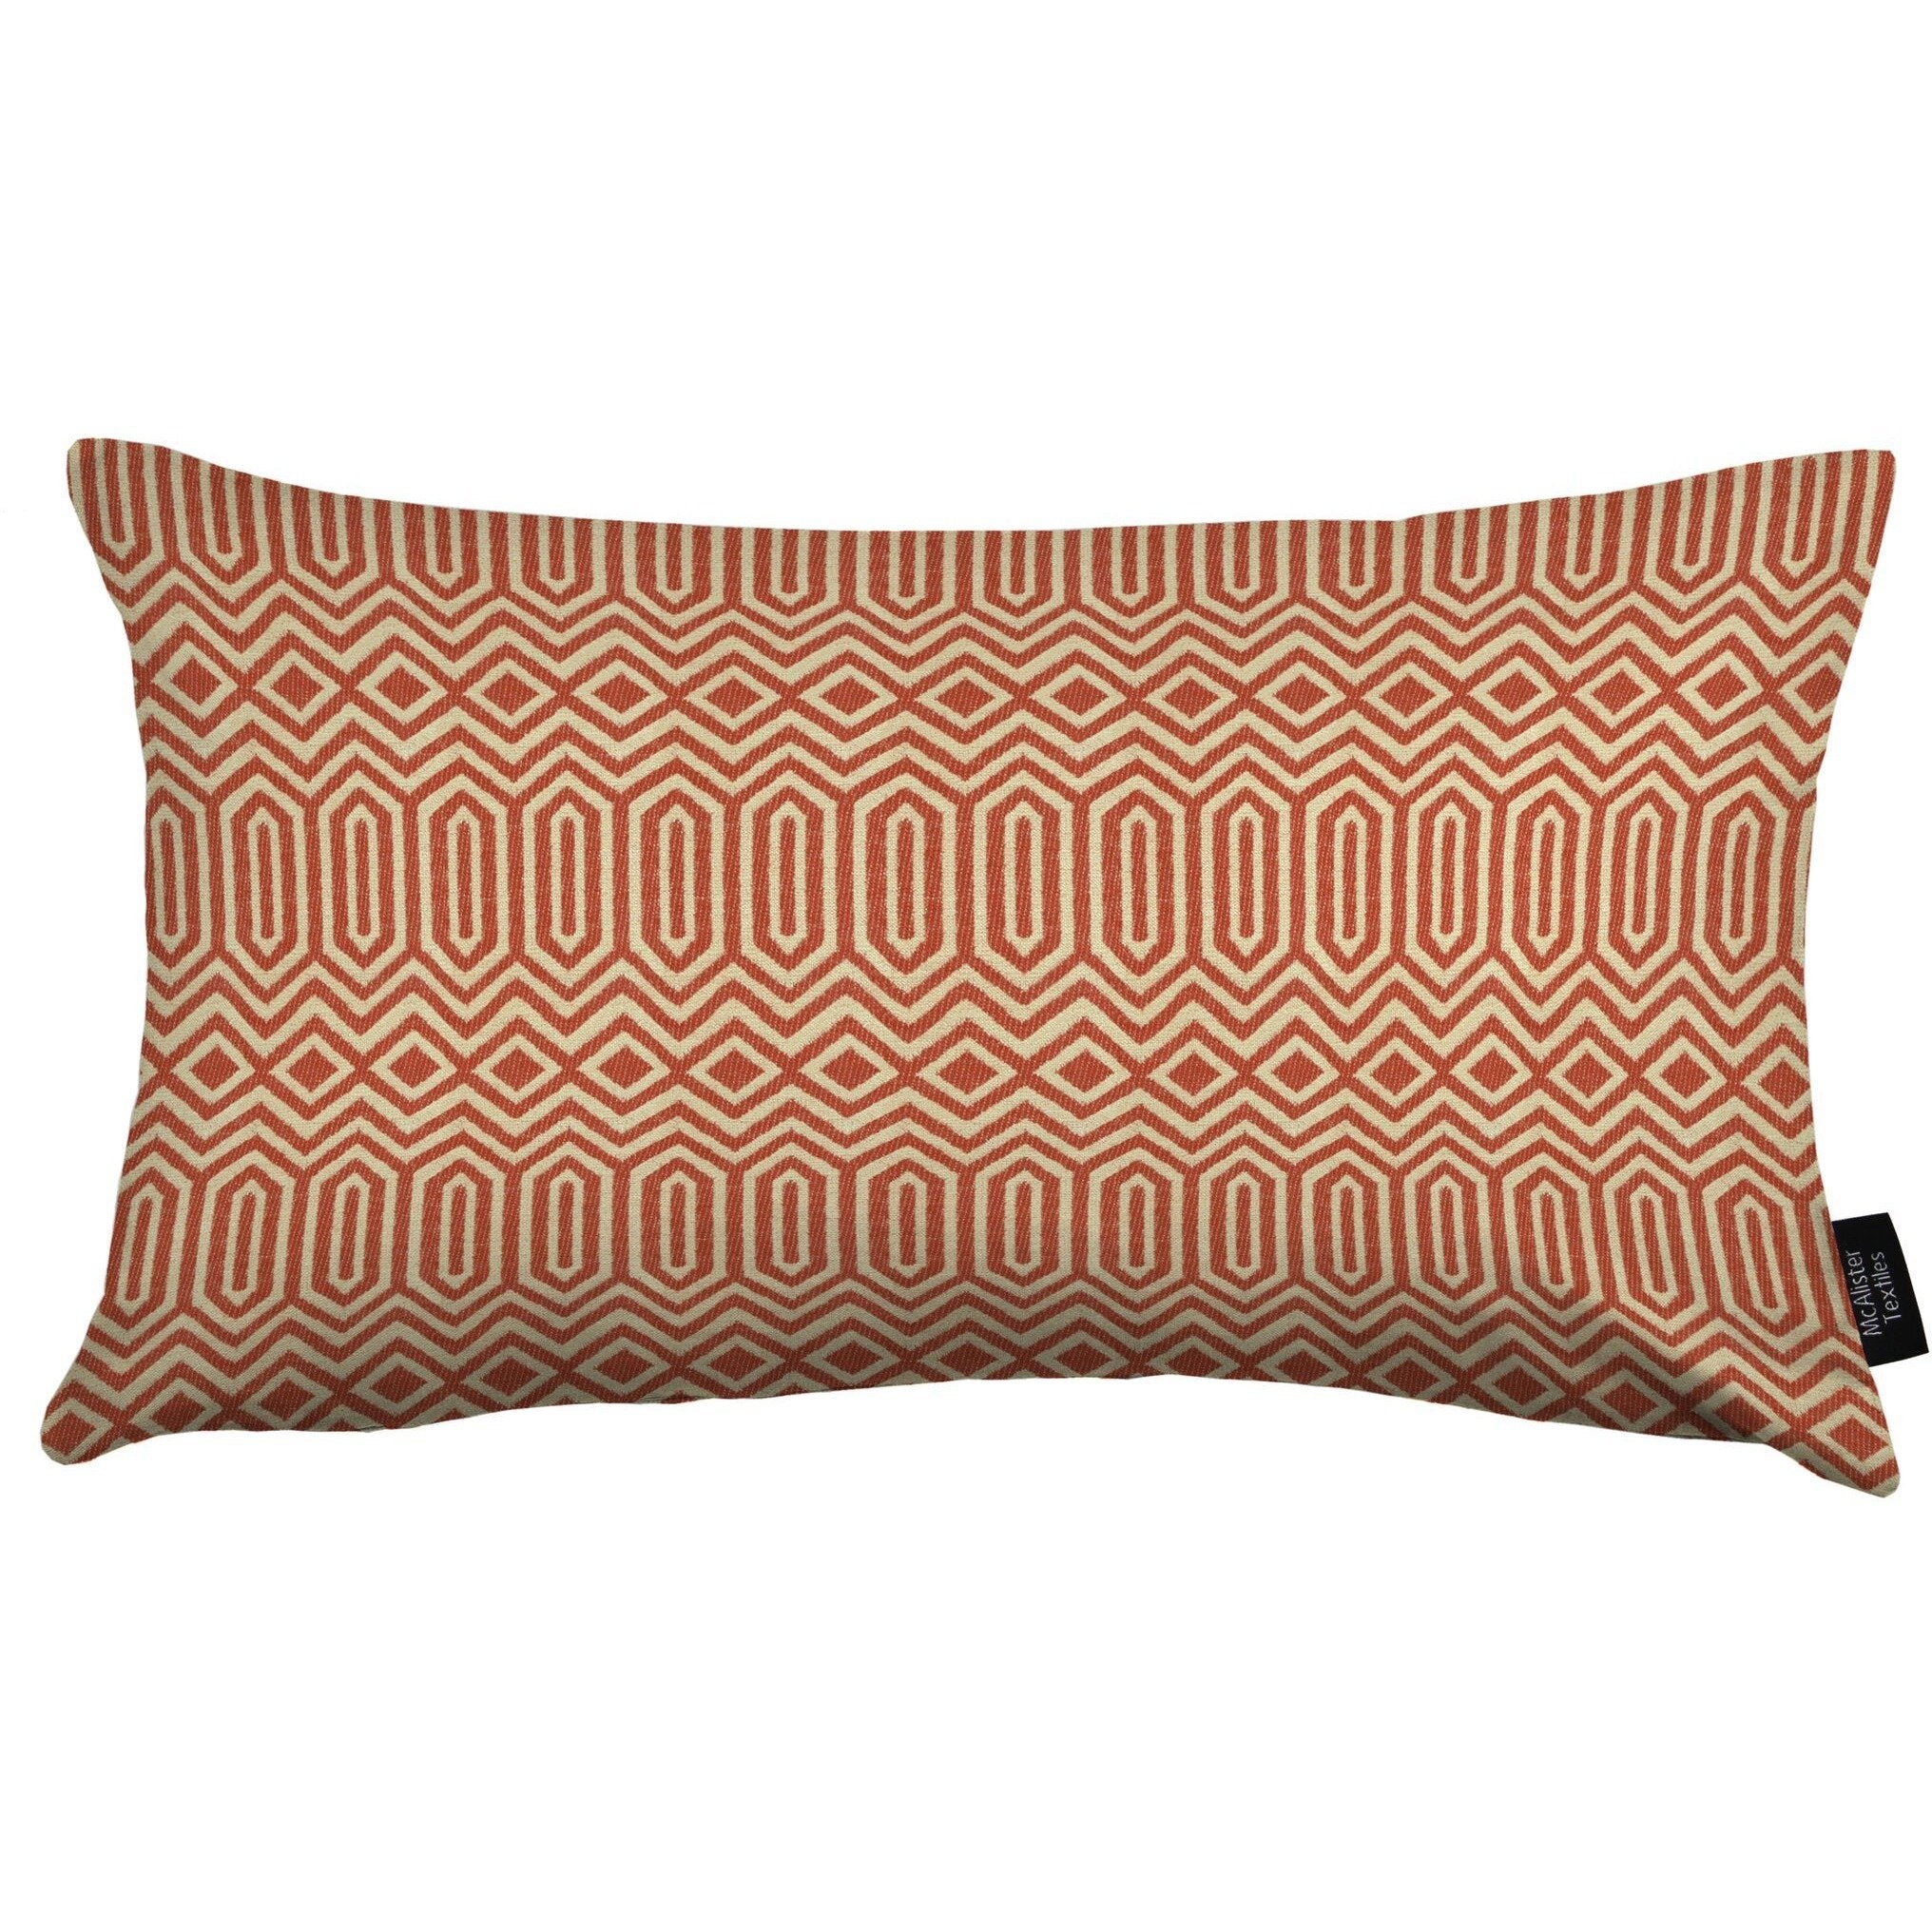 McAlister Textiles Colorado Geometric Burnt Orange Cushion Cushions and Covers Cover Only 50cm x 30cm 